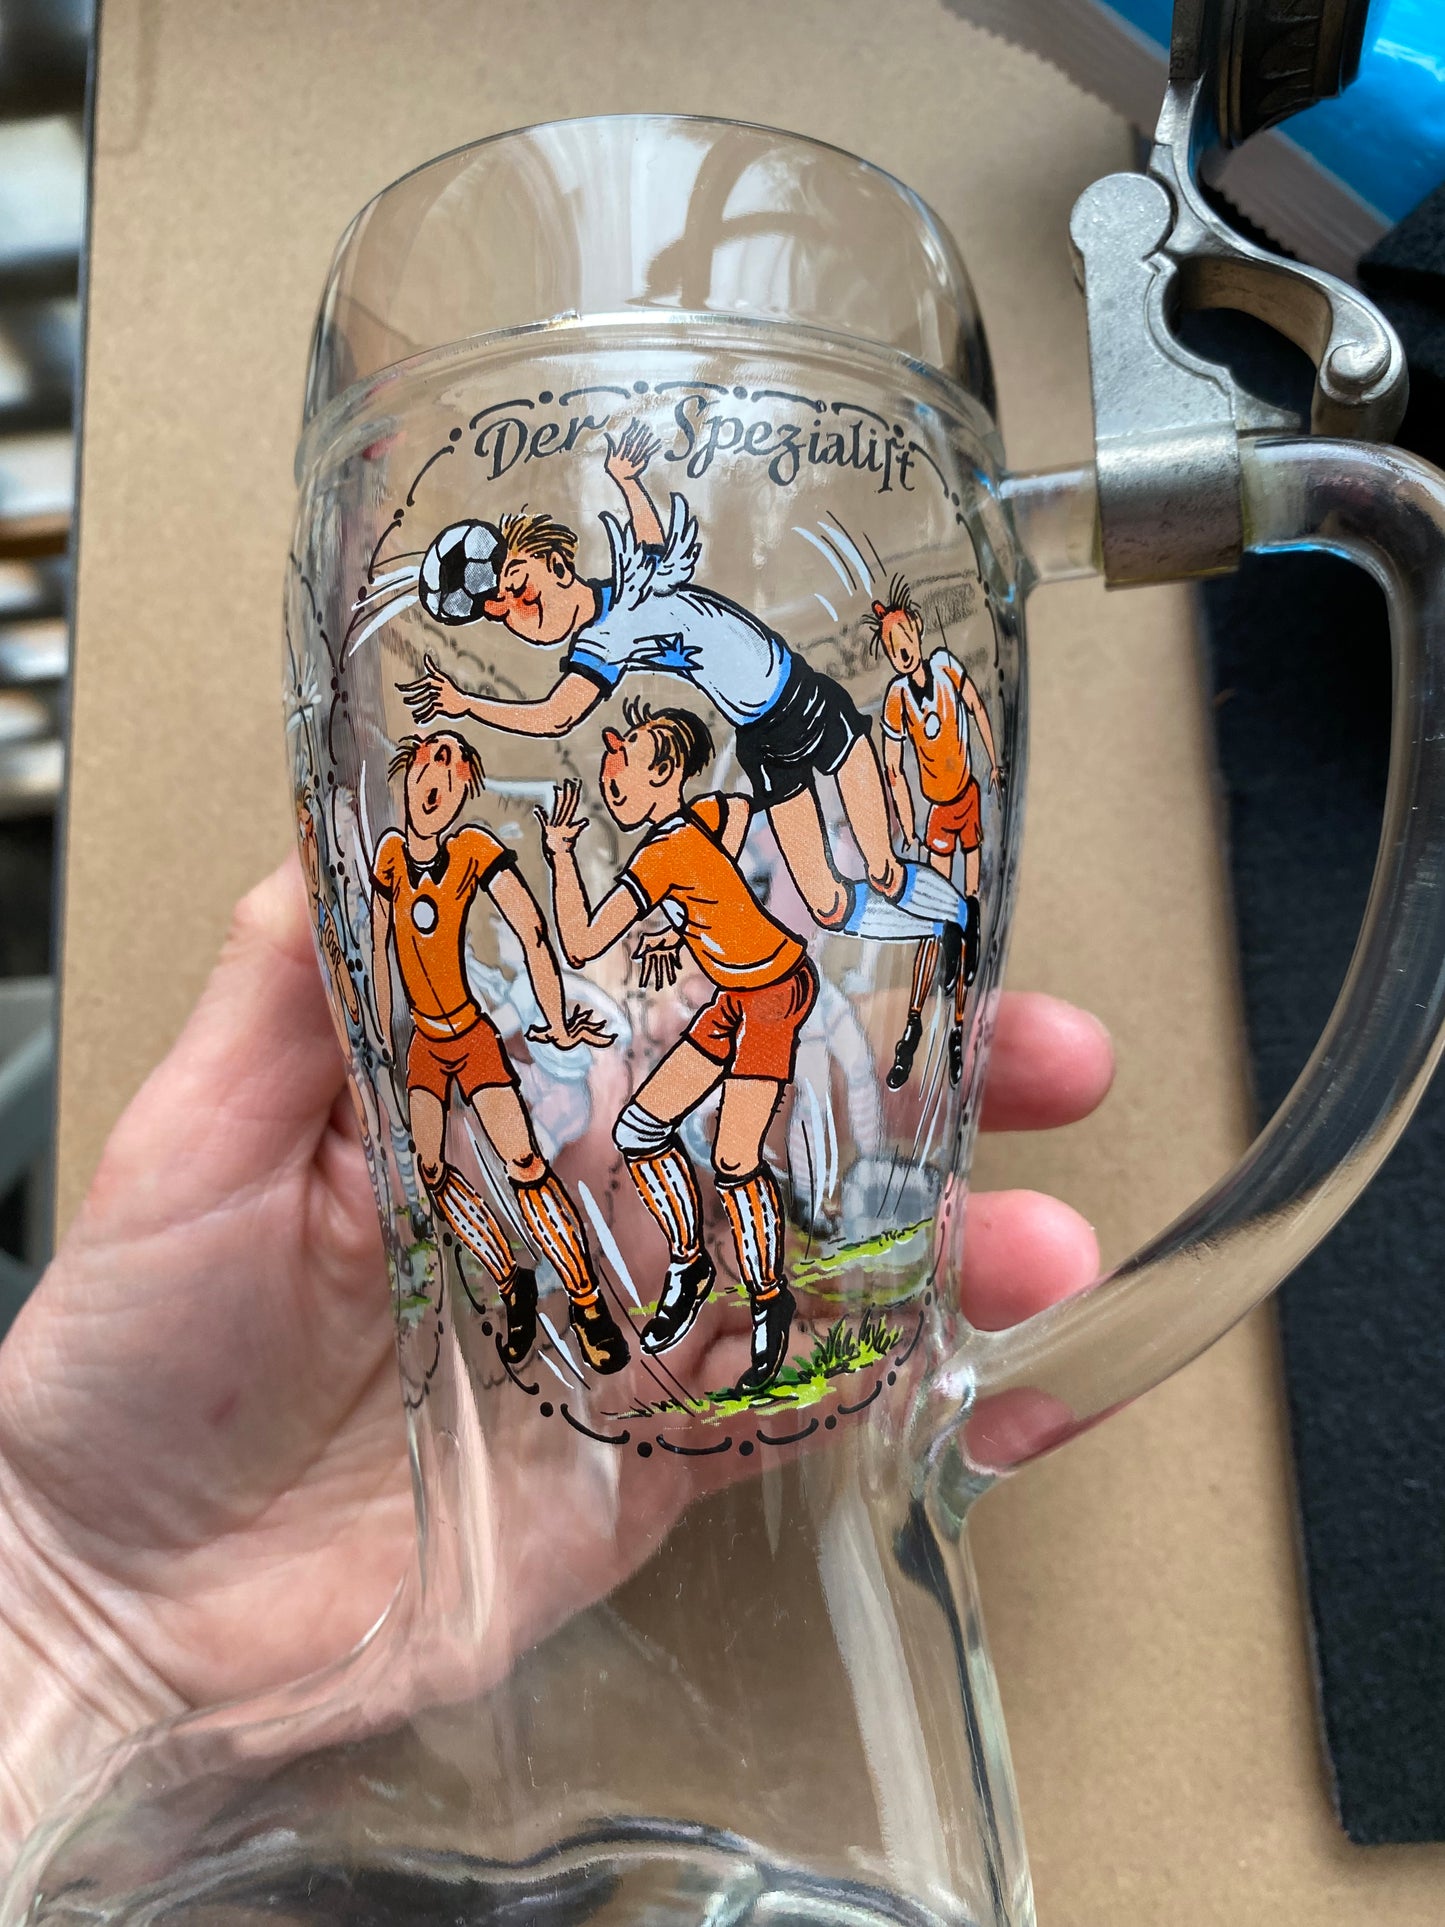 BMF(N) West German Collectable Kitschy Glass beer stein - 1950s soccer motif